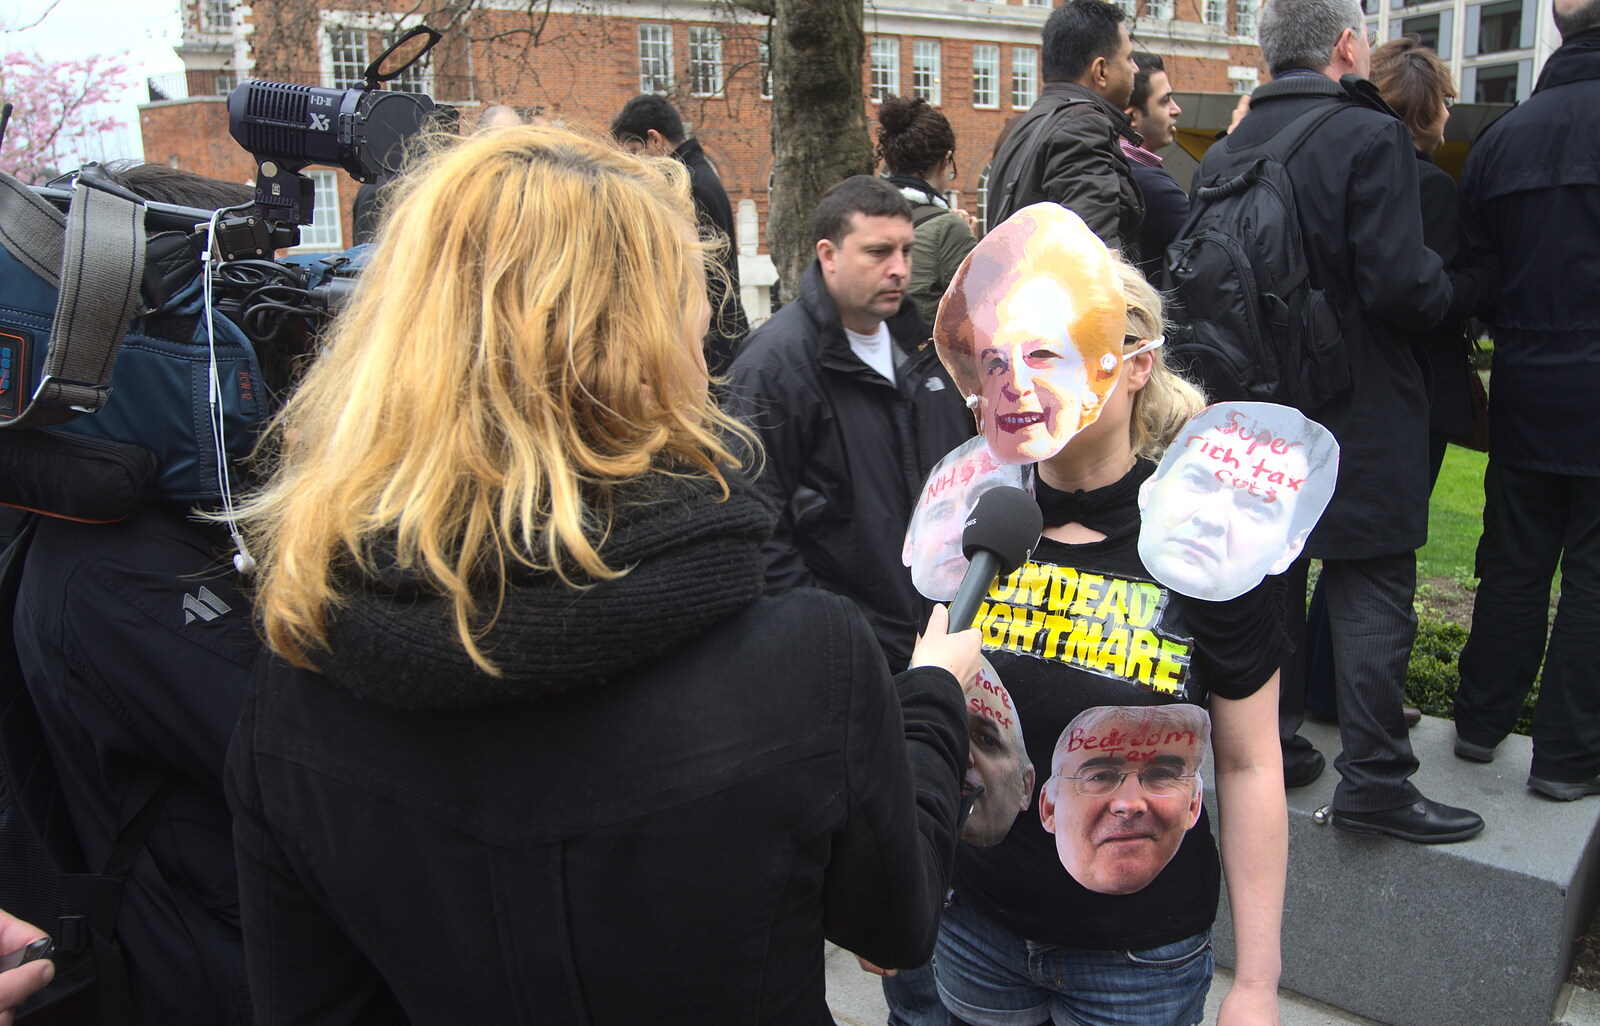 A protester is interviewed from Margaret Thatcher's Funeral, St. Paul's, London - 17th April 2013